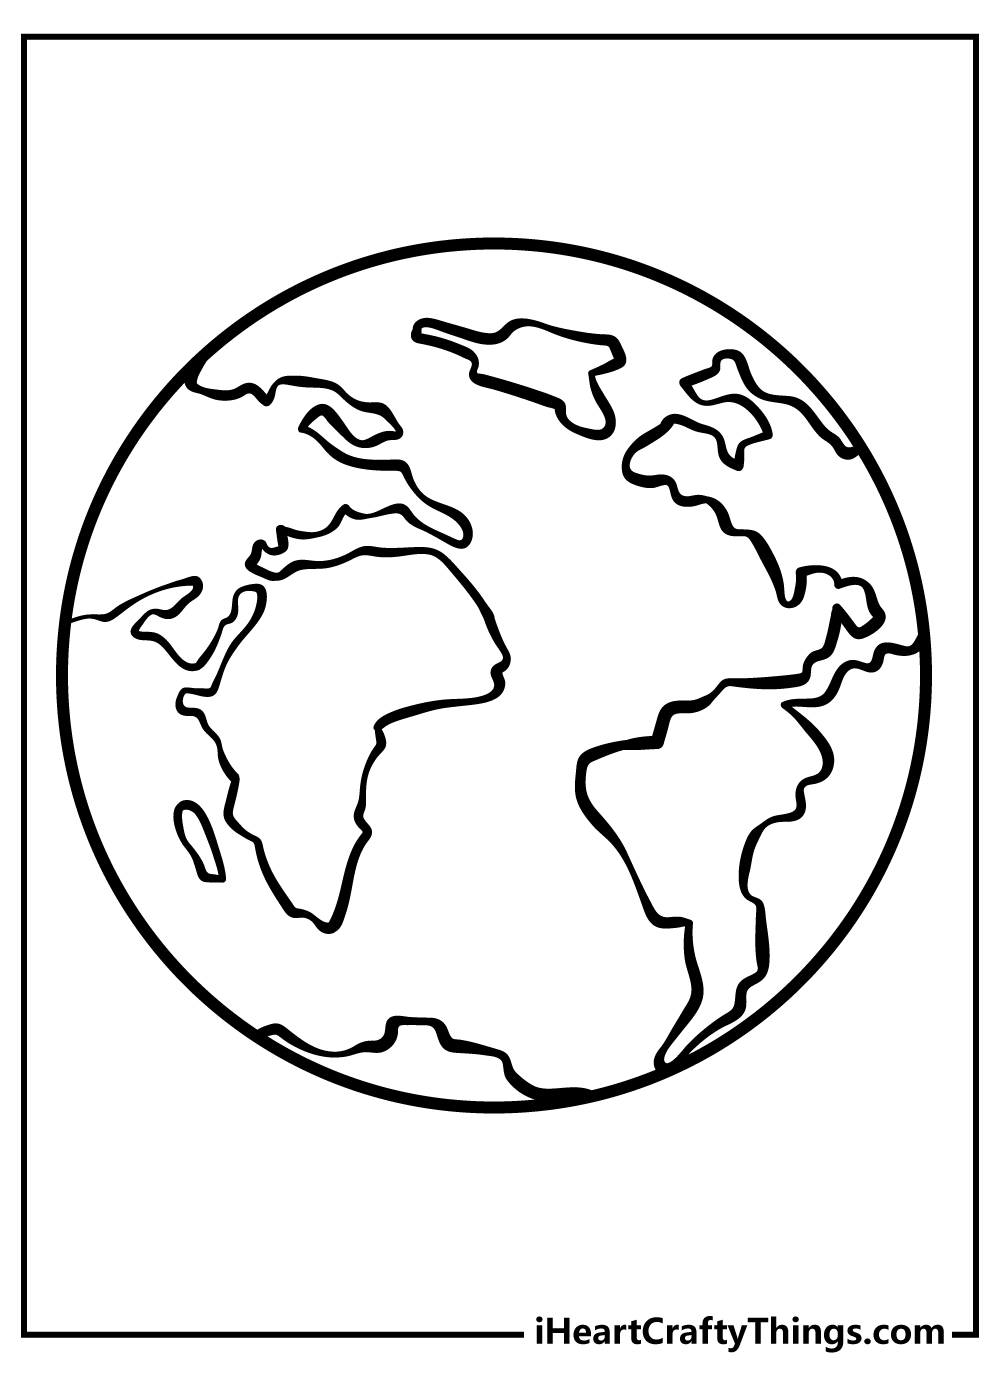 Earth Coloring Pages for kids free download